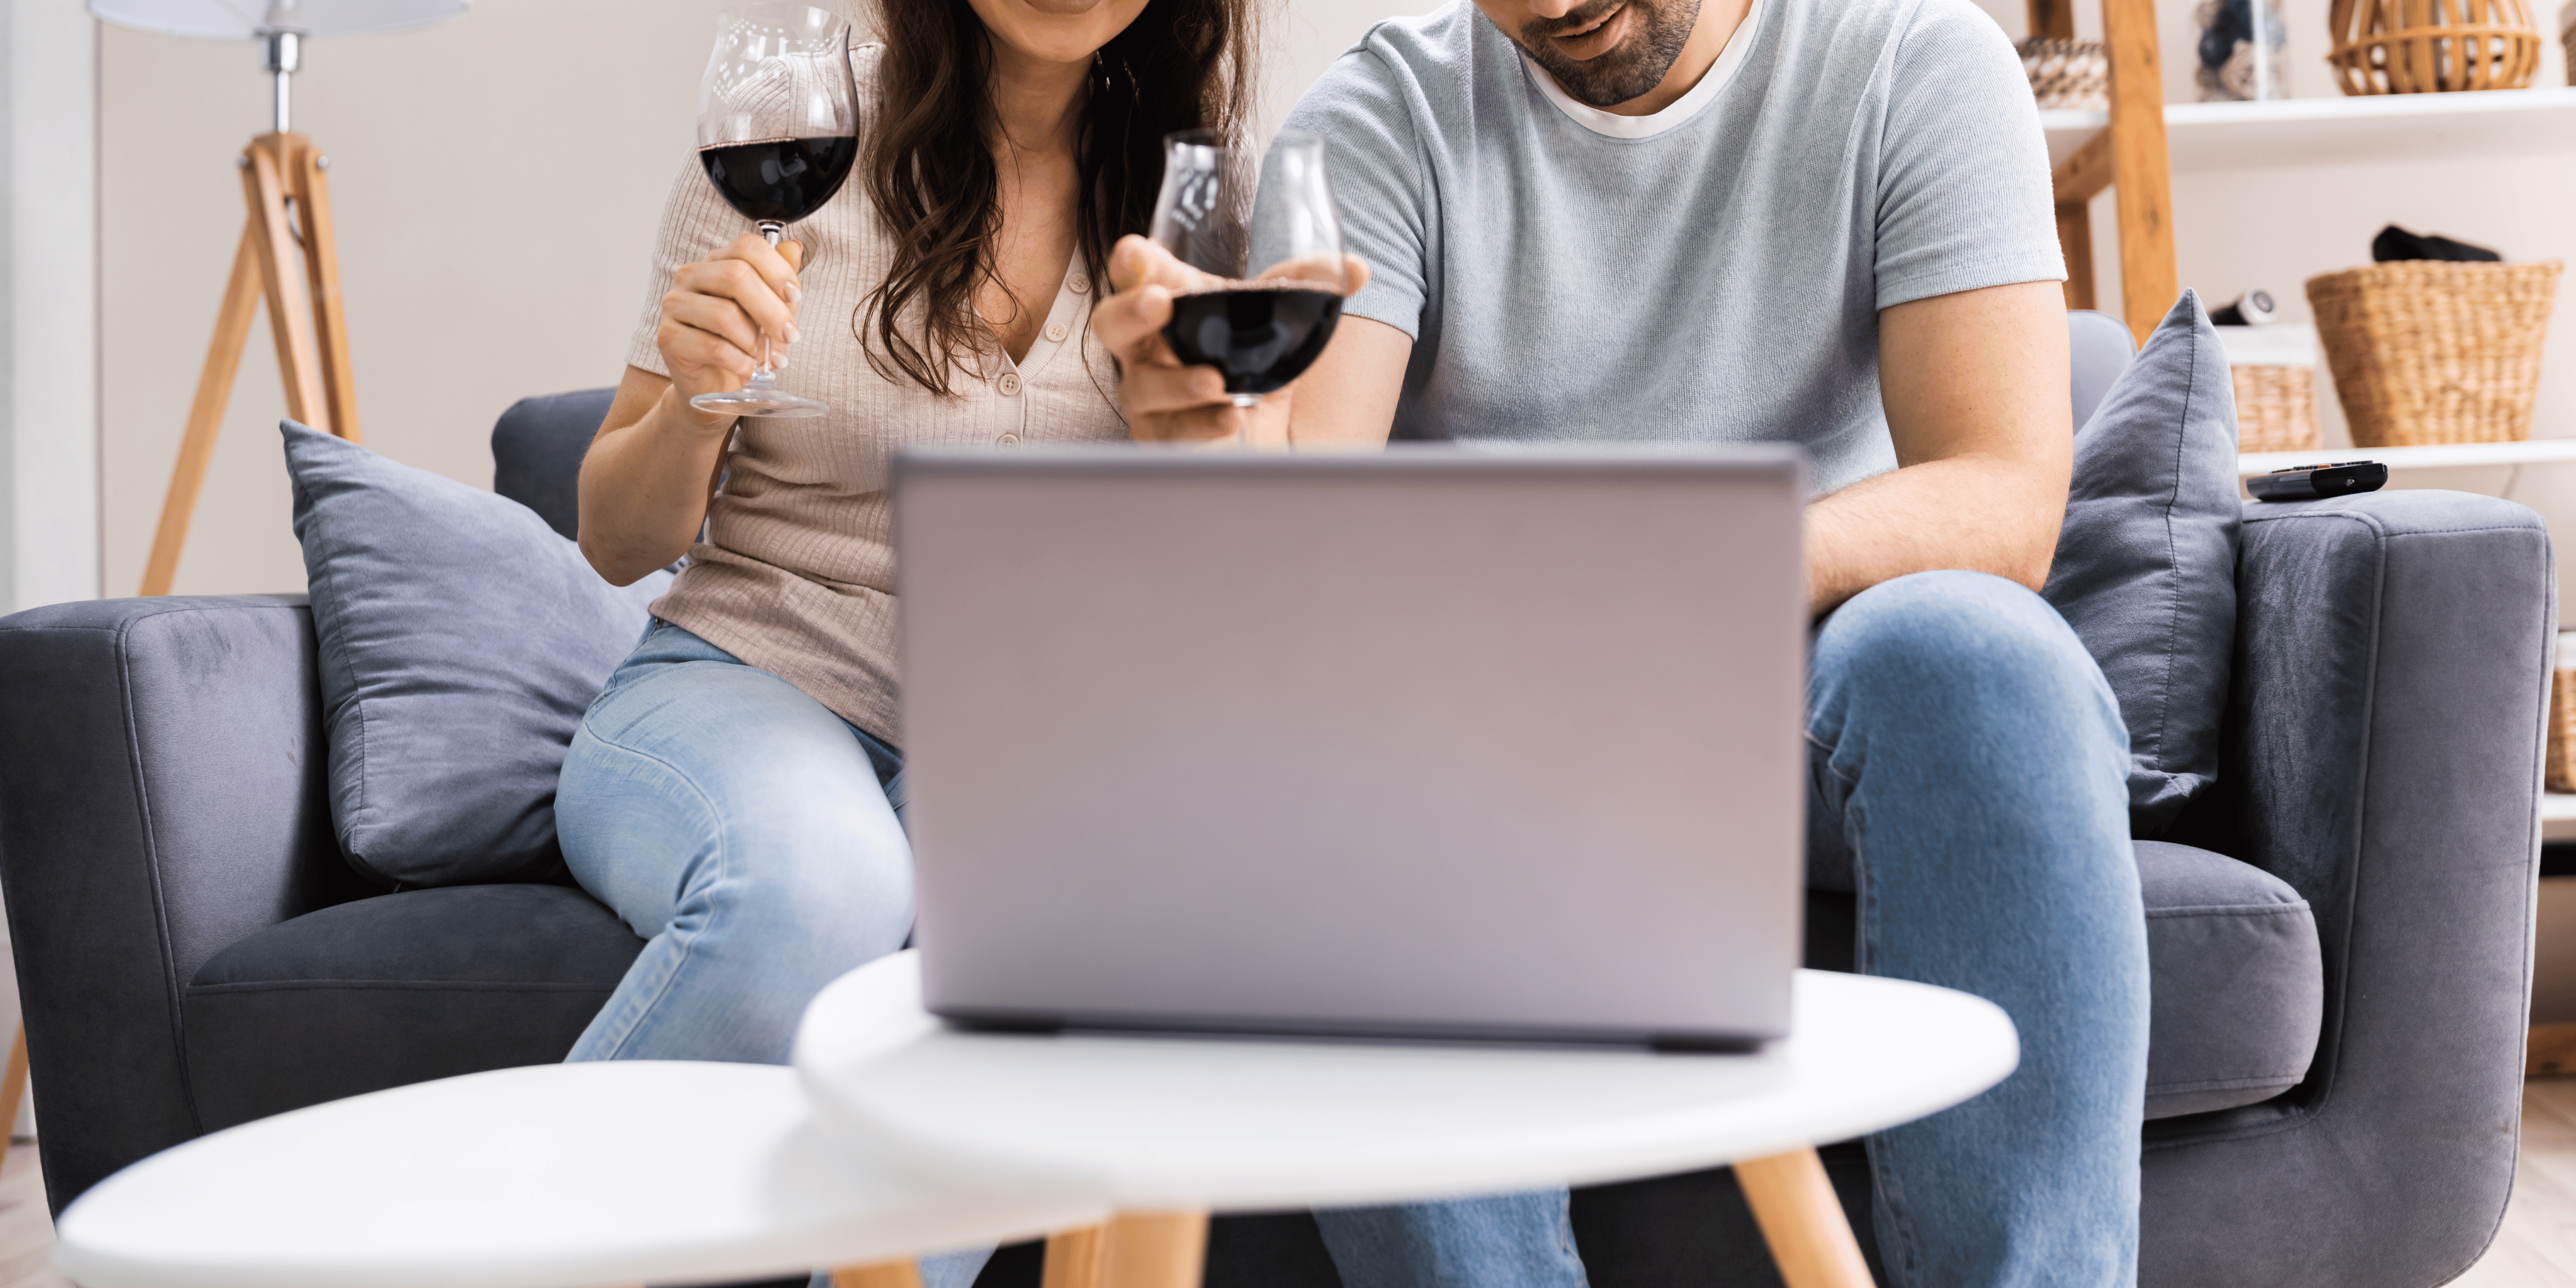 people looking for a deal on wine online